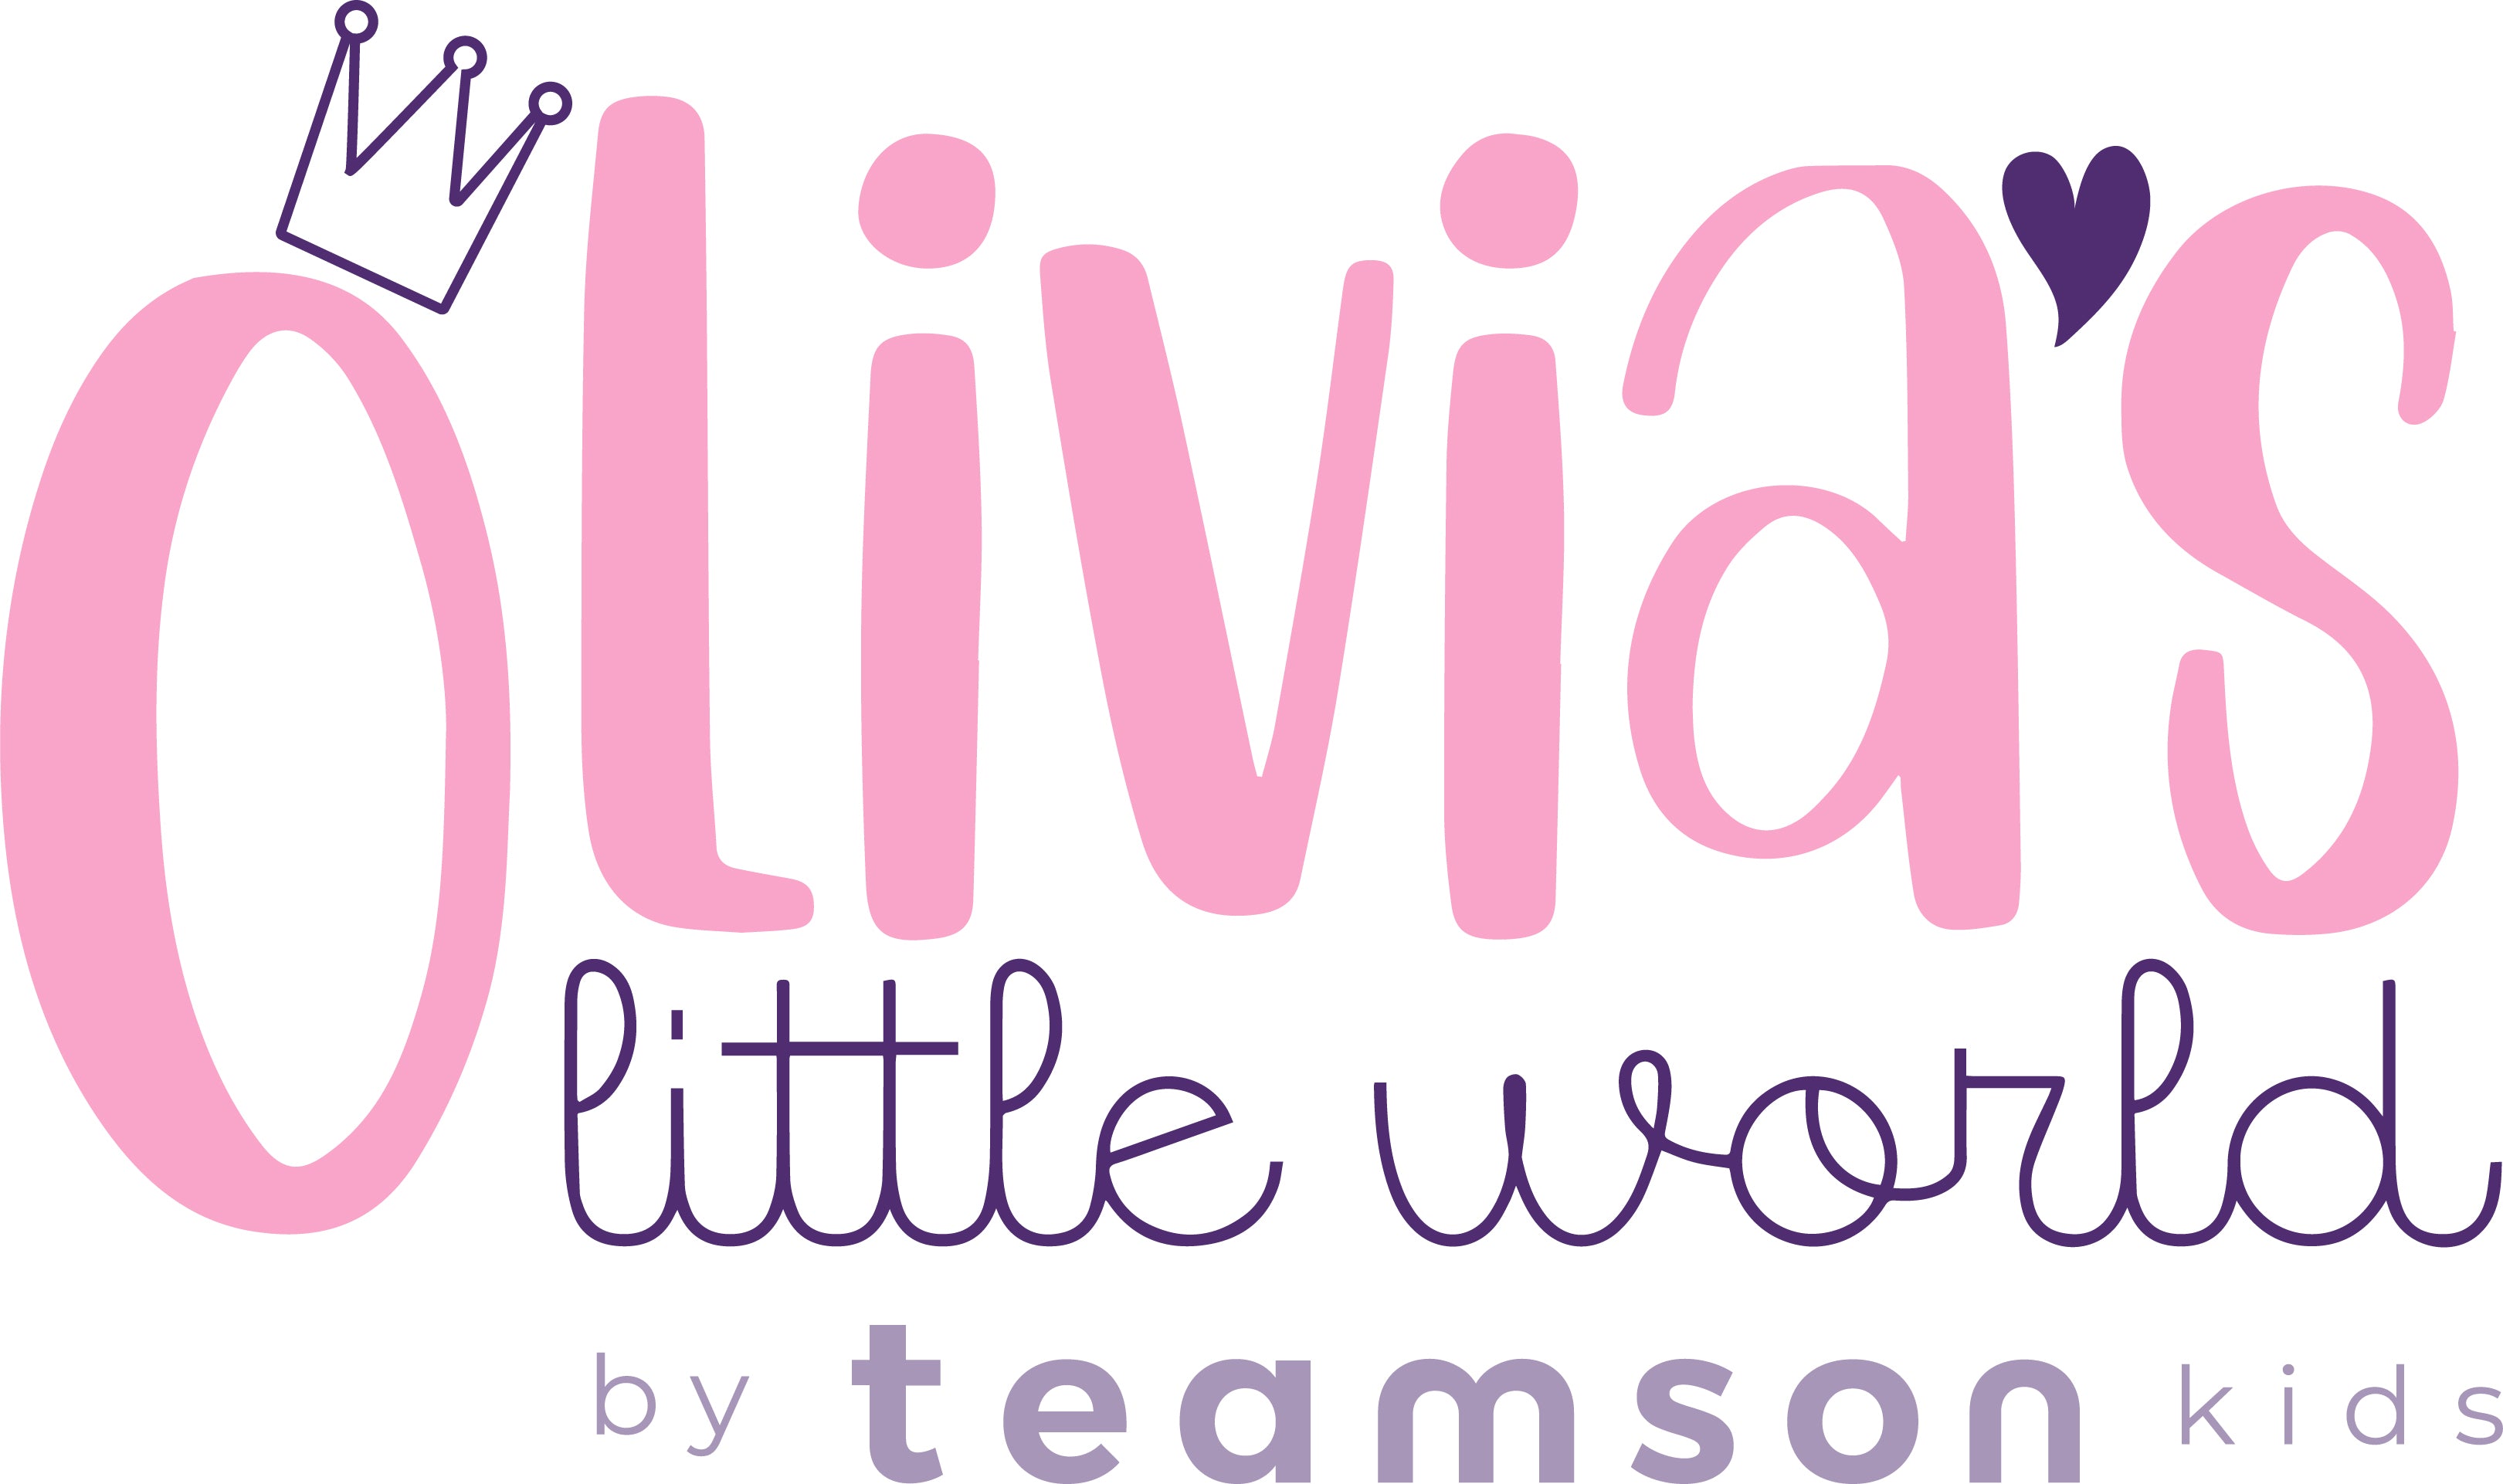 Olivia's Little World logo features a fun pink font and the O is wearing a tiara.